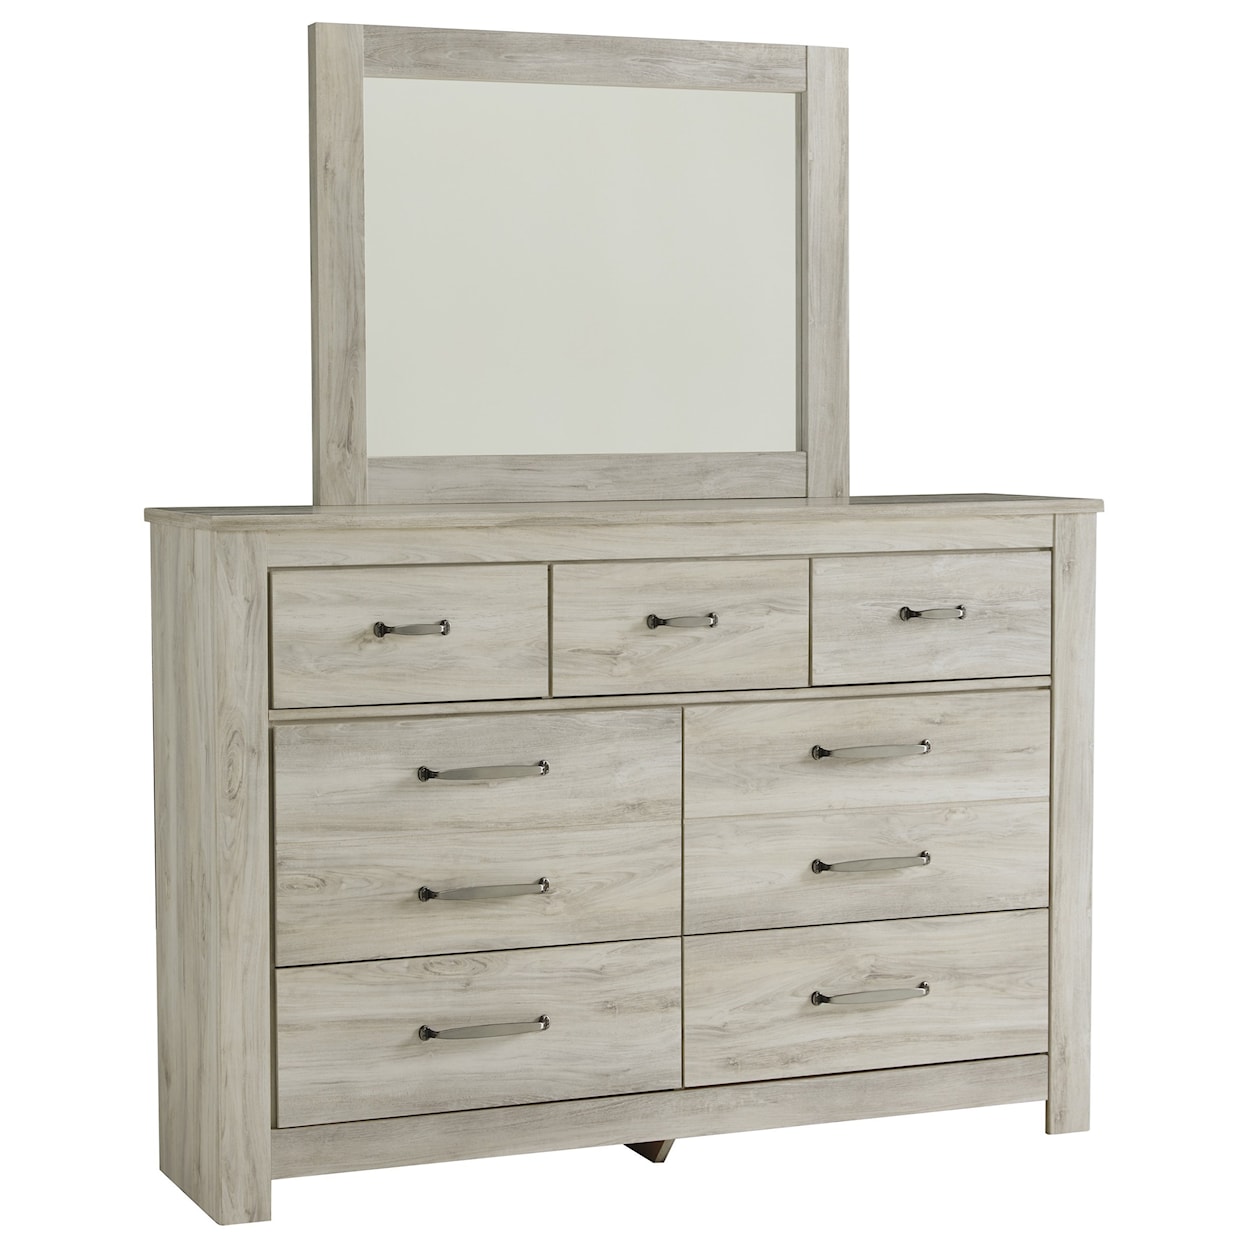 Signature Design by Ashley Furniture Bellaby Dresser and Mirror Set